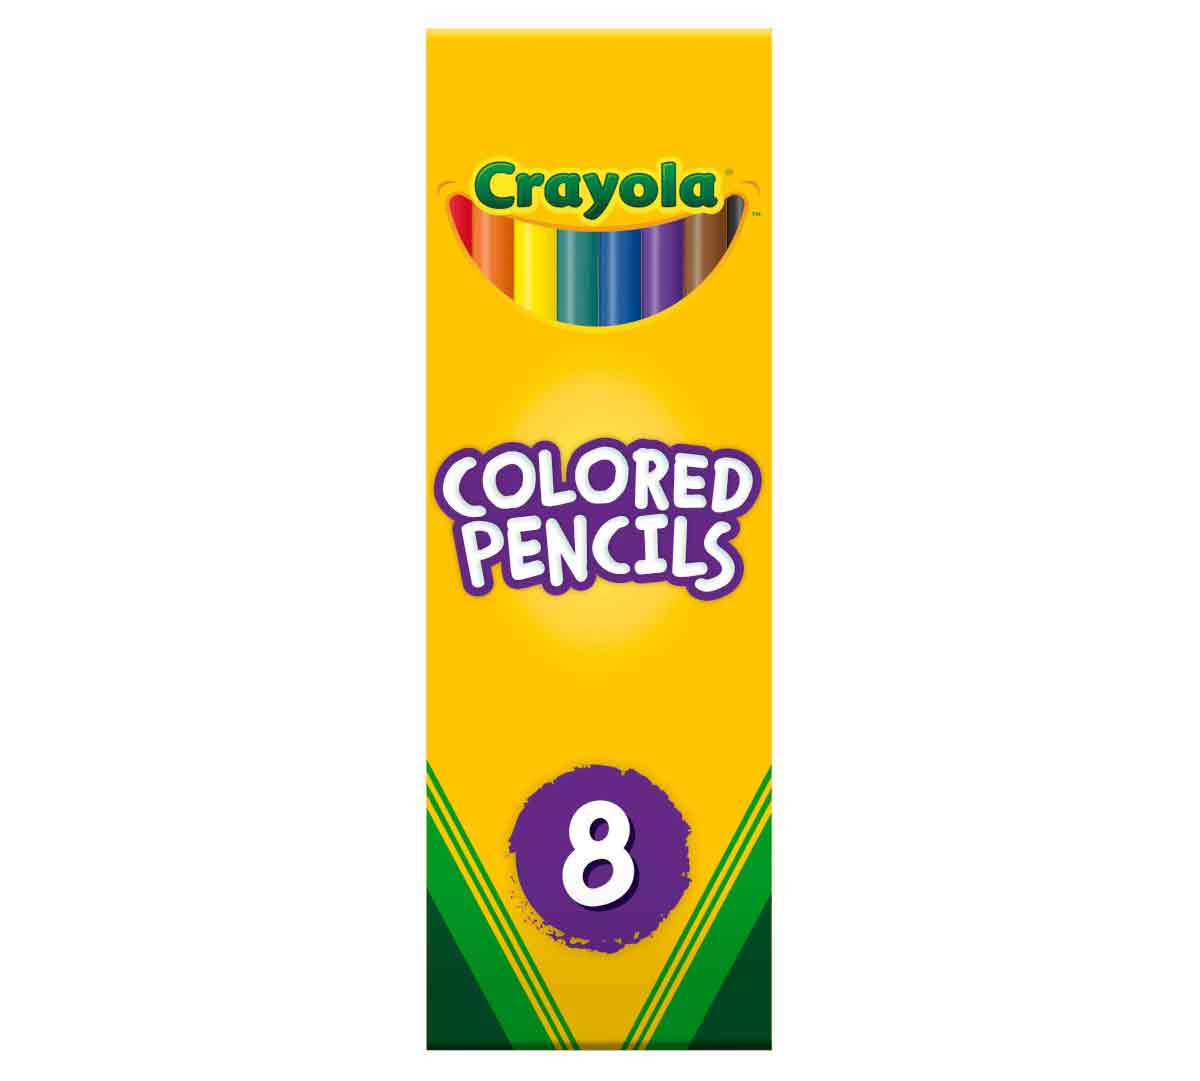 Colored Pencils-8 Ct Assorted by Crayola: Colored Pencils